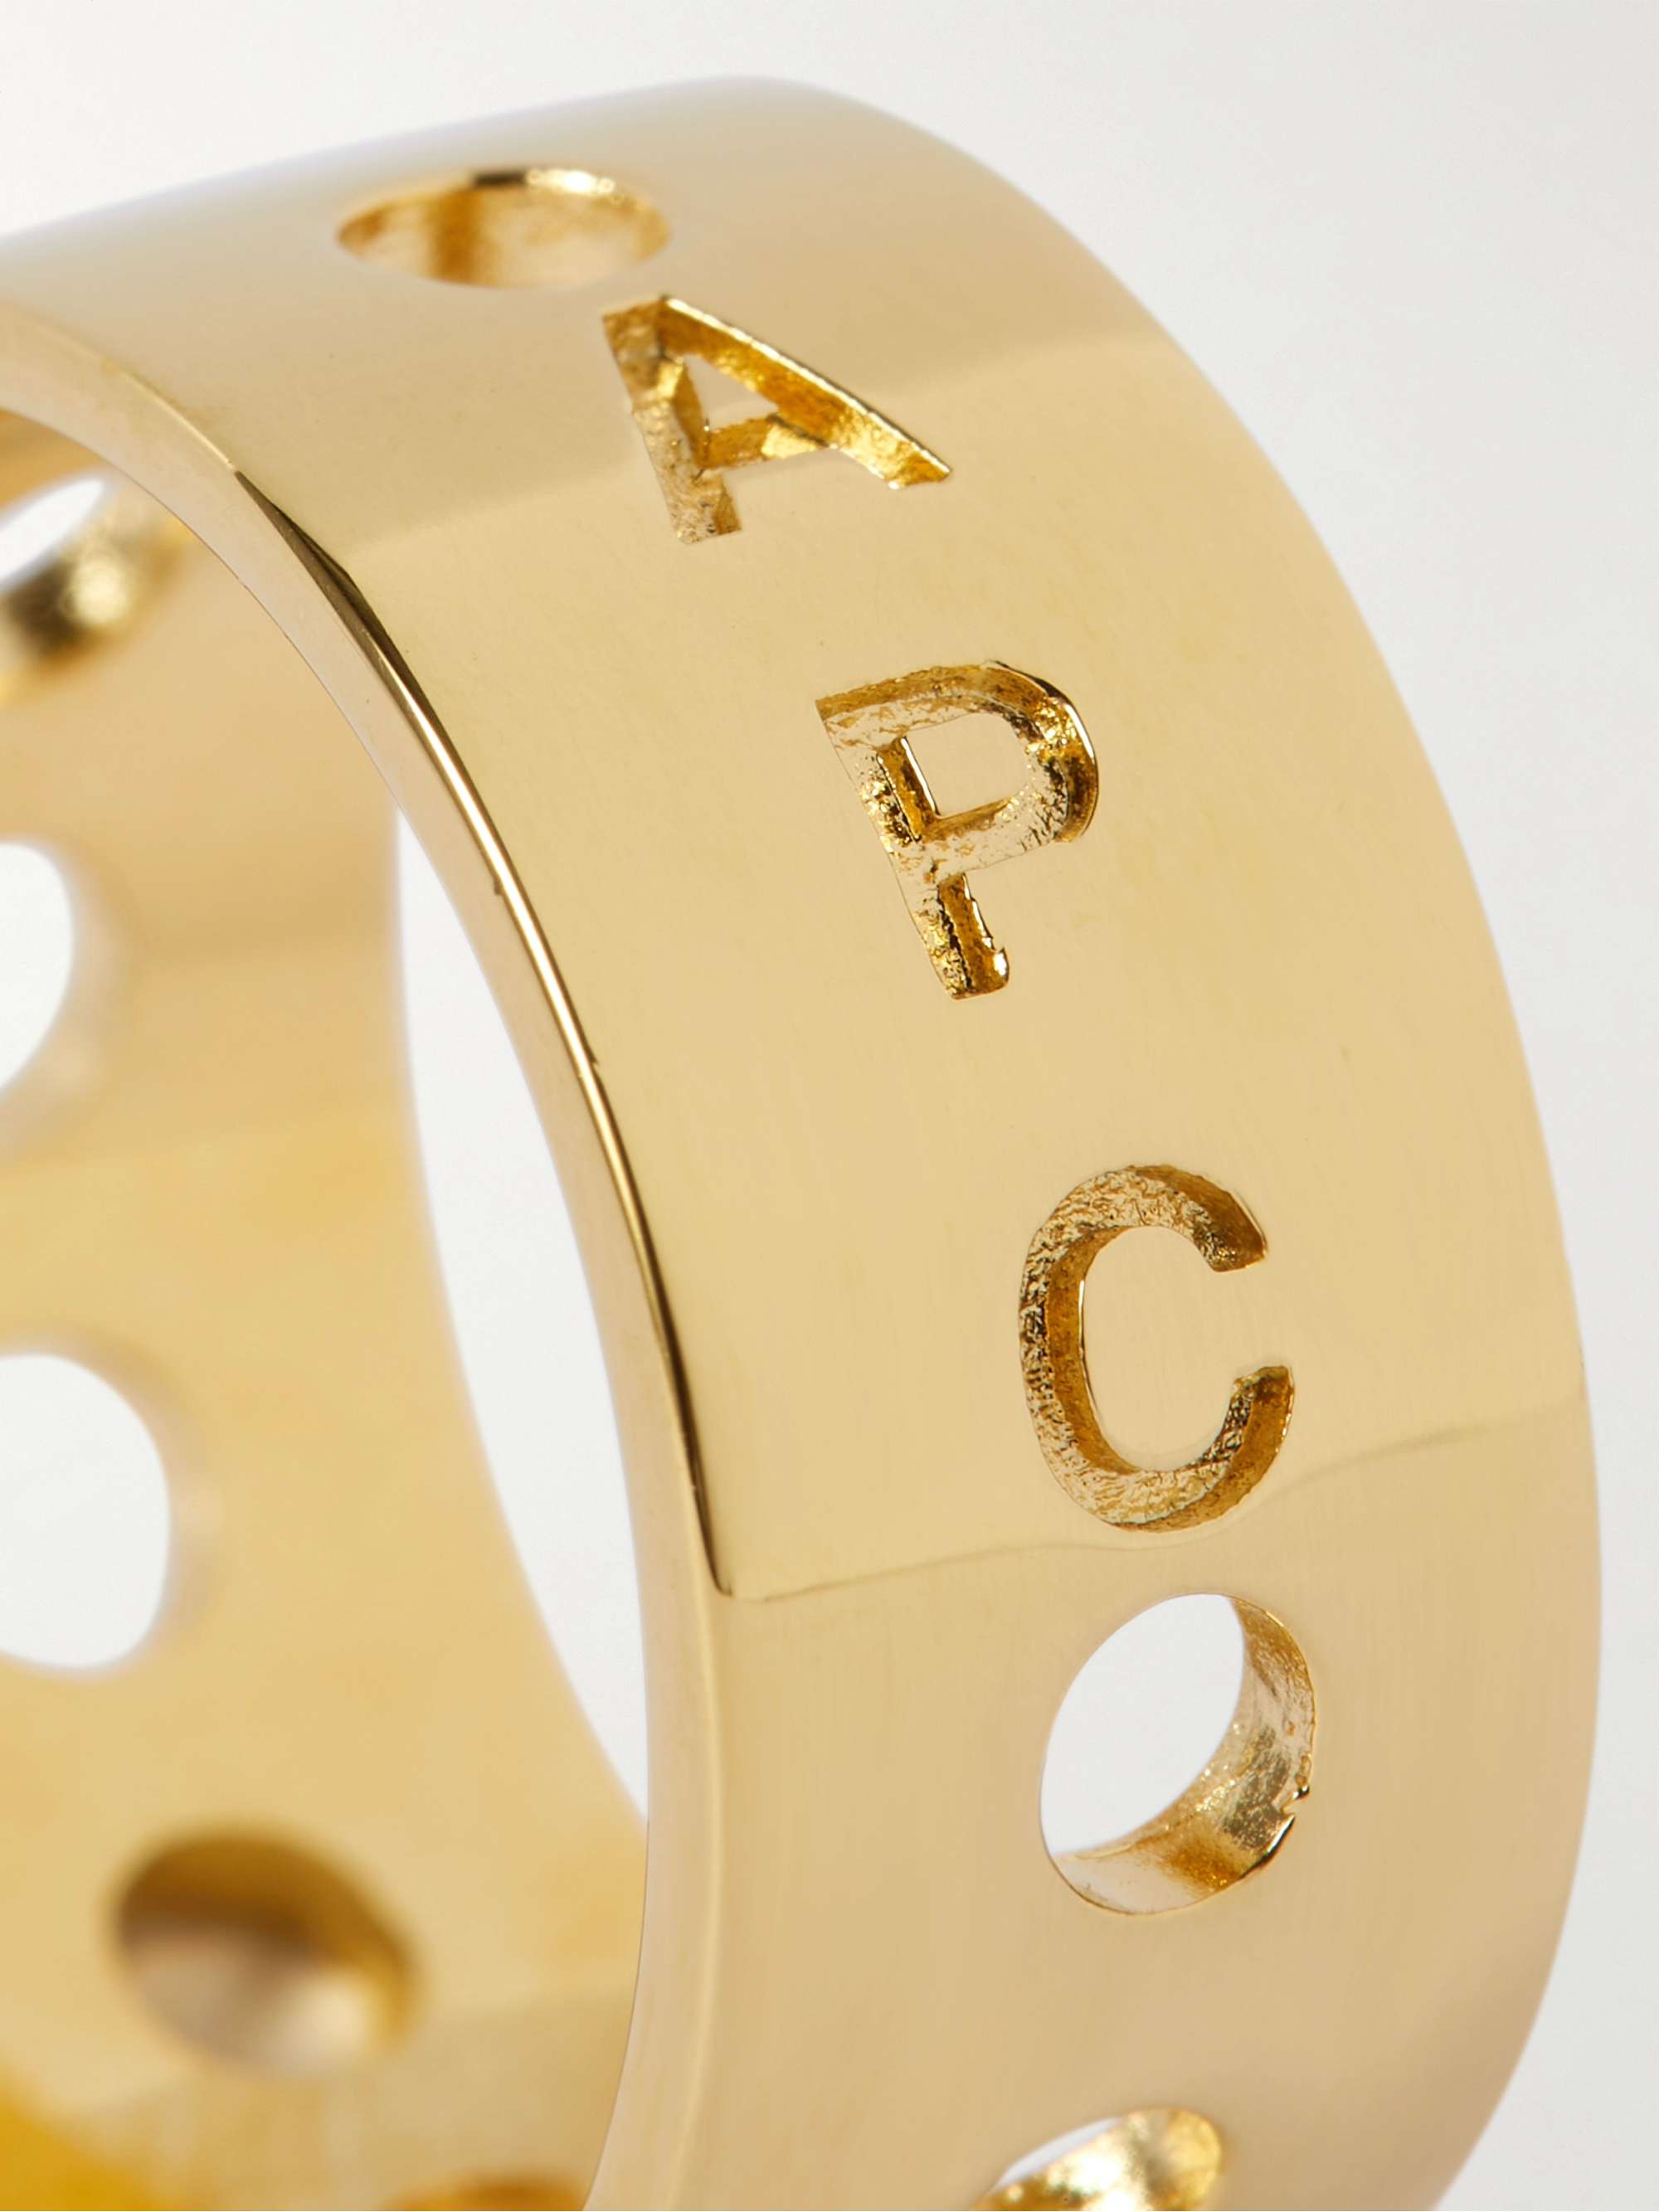 A.P.C. Concert Logo-Engraved Gold-Tone Ring